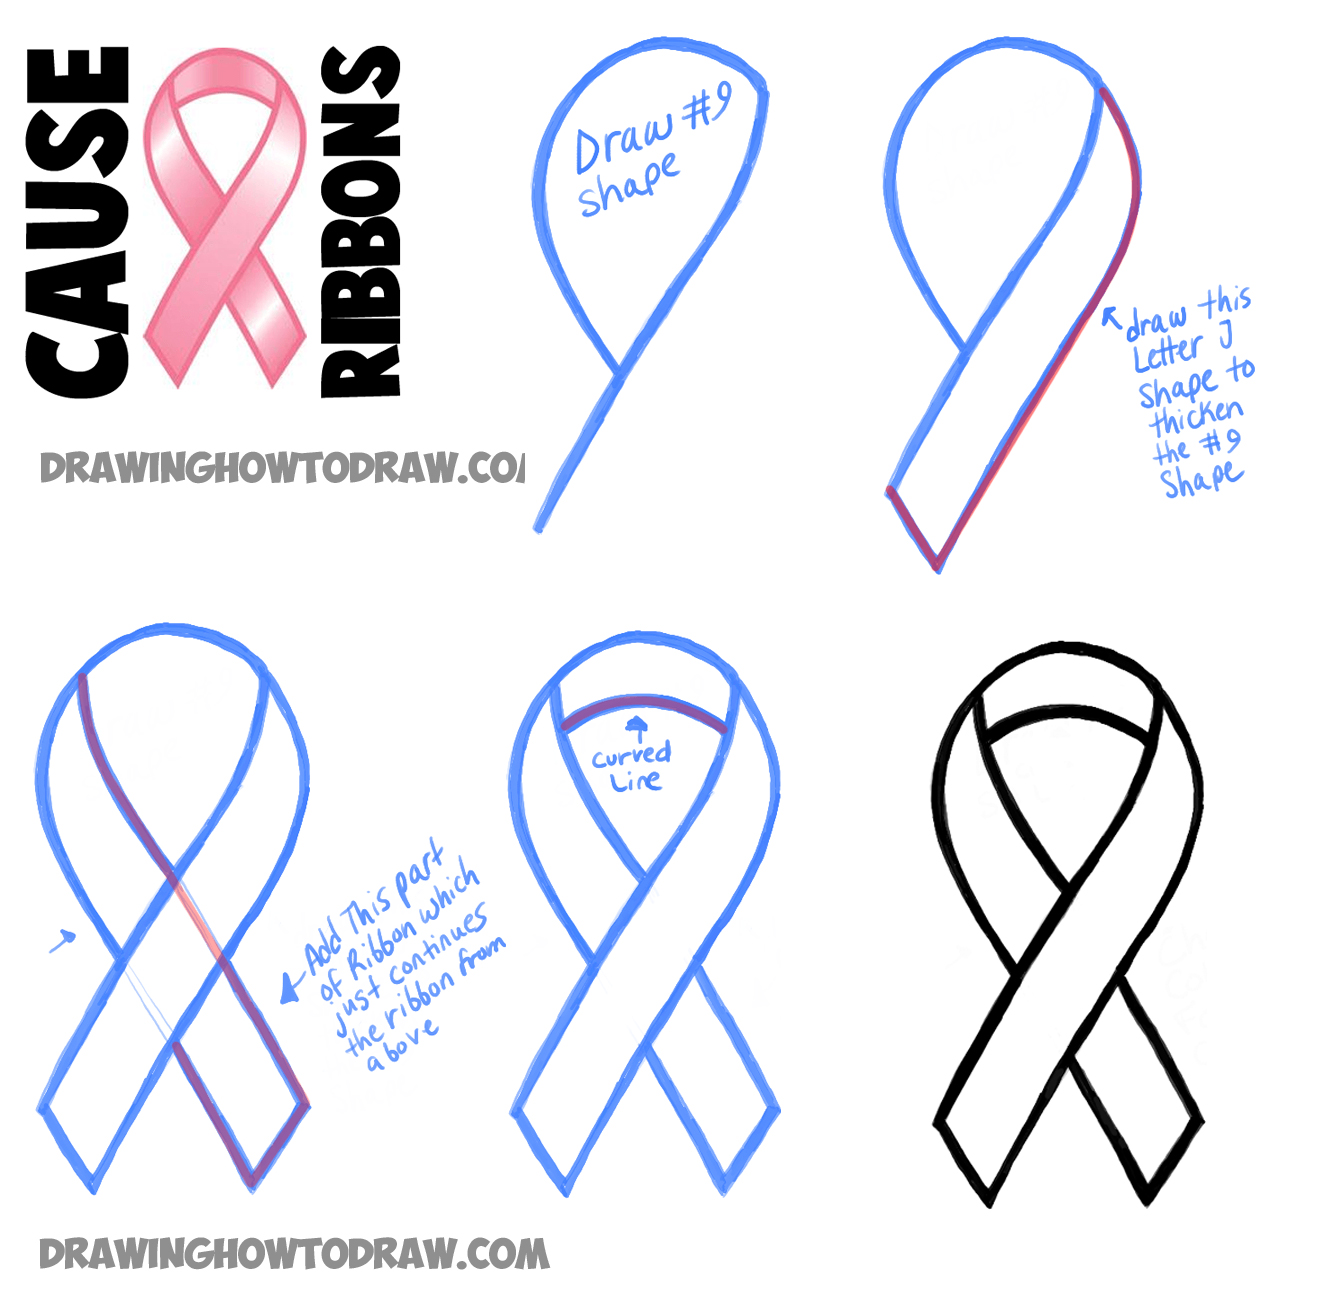 how to draw cause ribbons - little pink ribbons